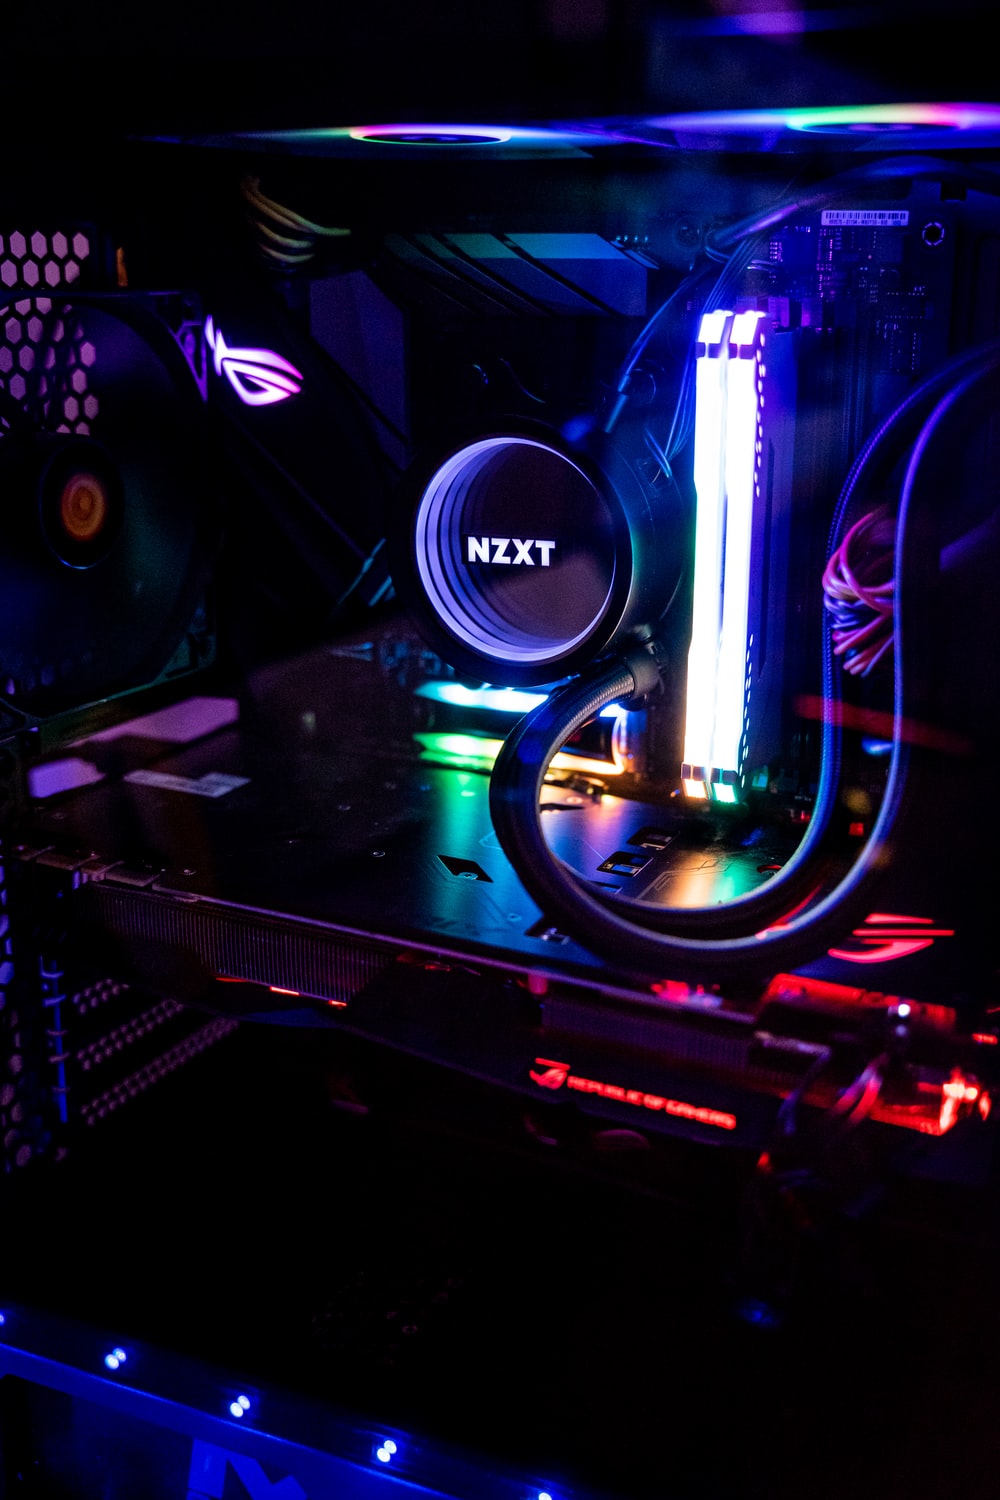 1K+ Pc Build Picture. Download Free Image